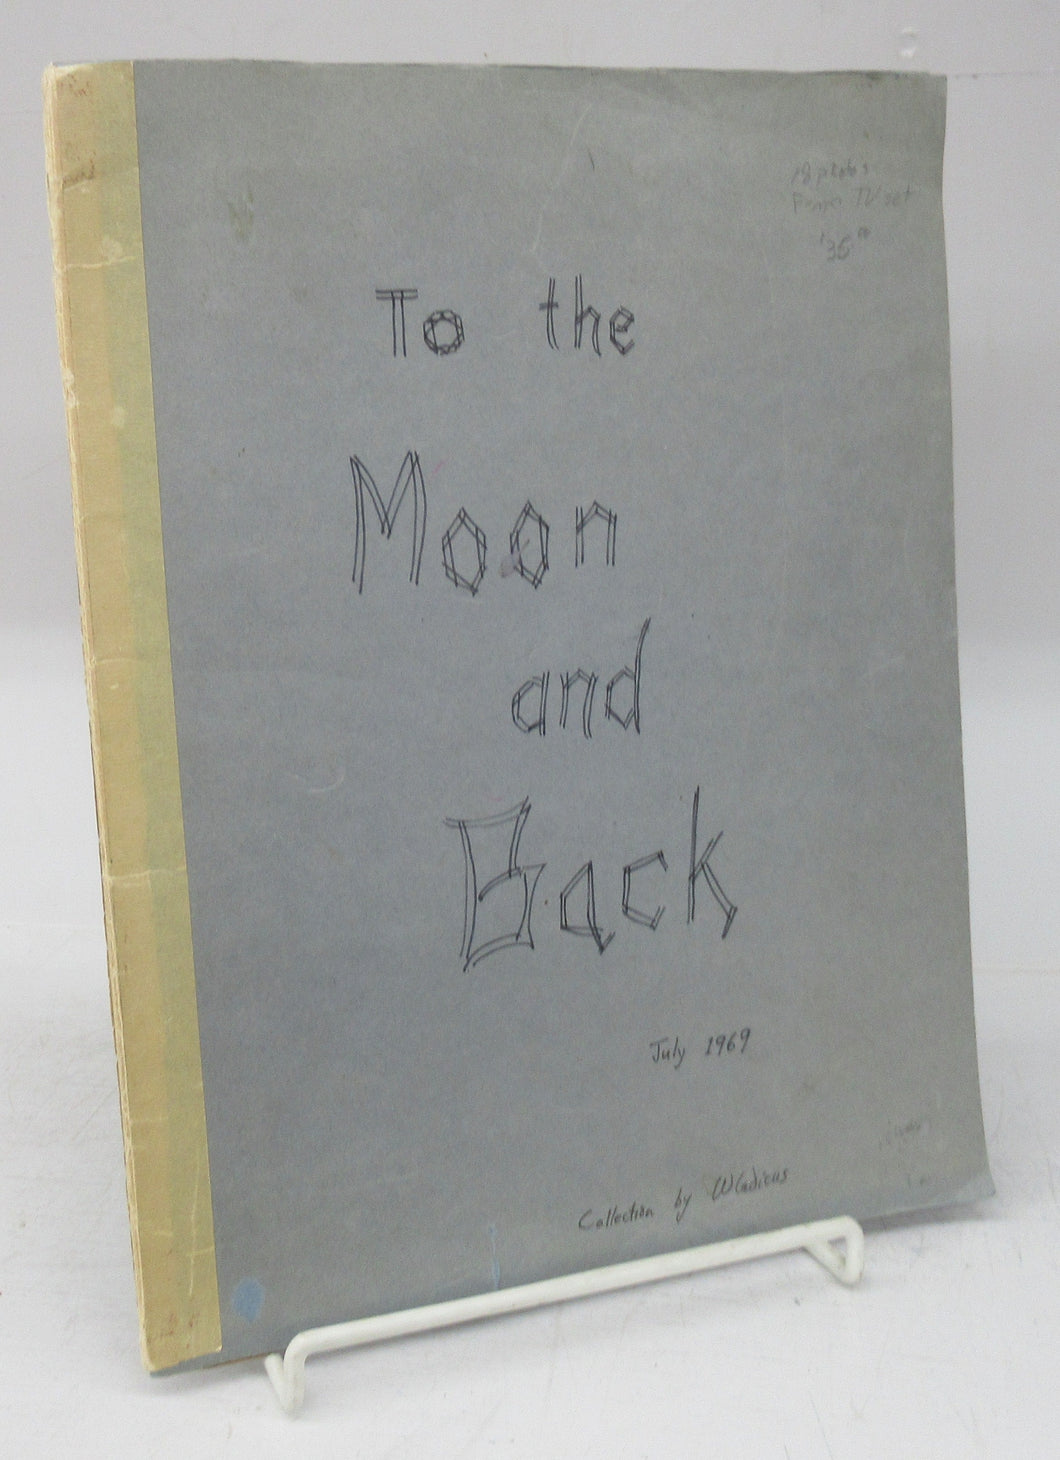 To the Moon and Back, July 1969